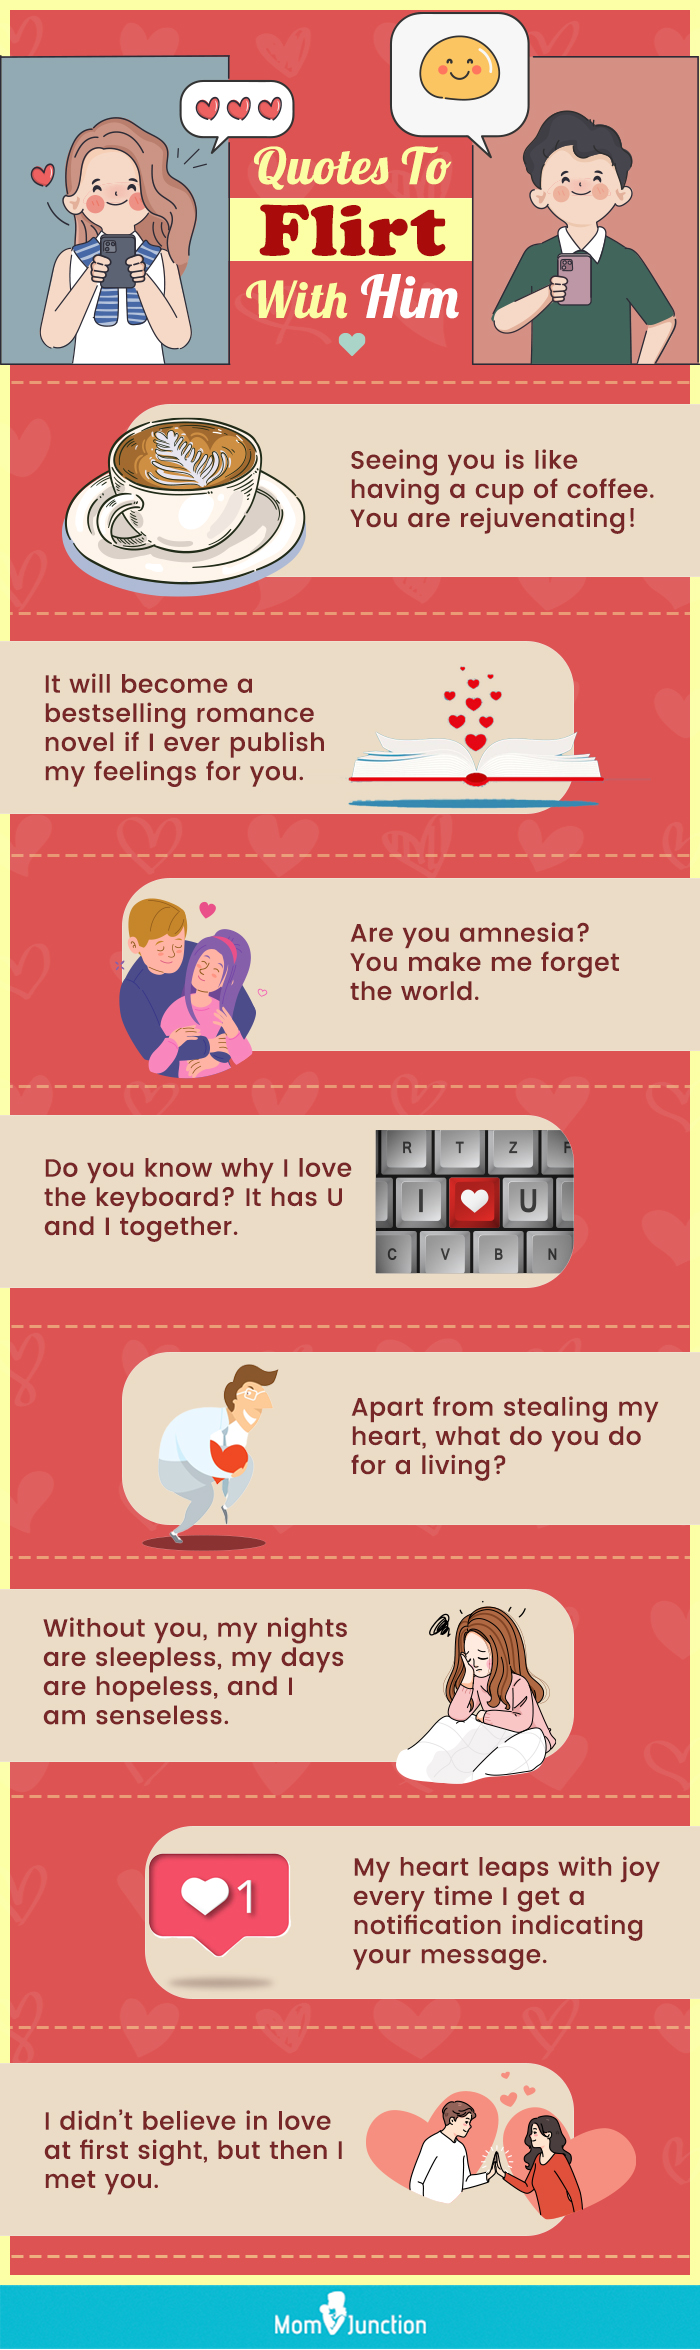 quotes for him (infographic)